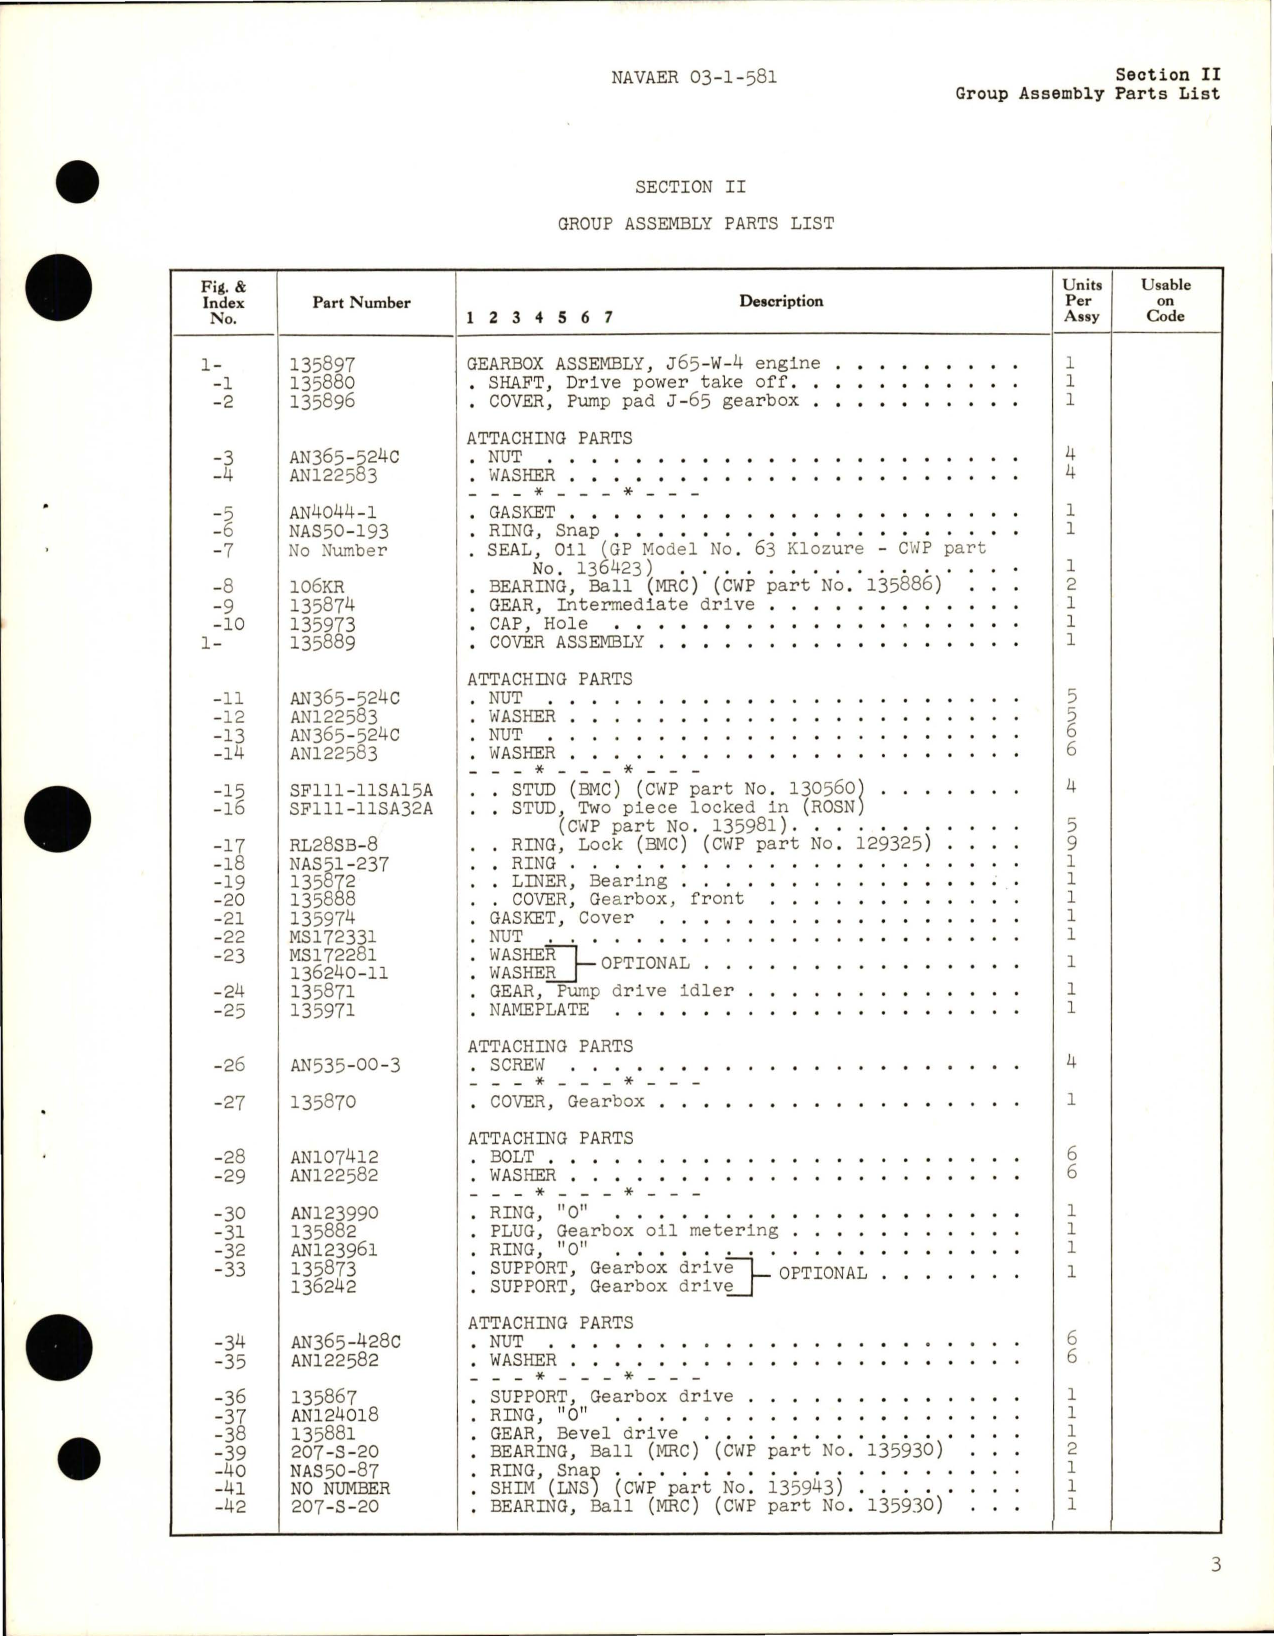 Sample page 5 from AirCorps Library document: Illustrated Parts Breakdown for Accessory Drive Gearbox Assembly - Part 135597 